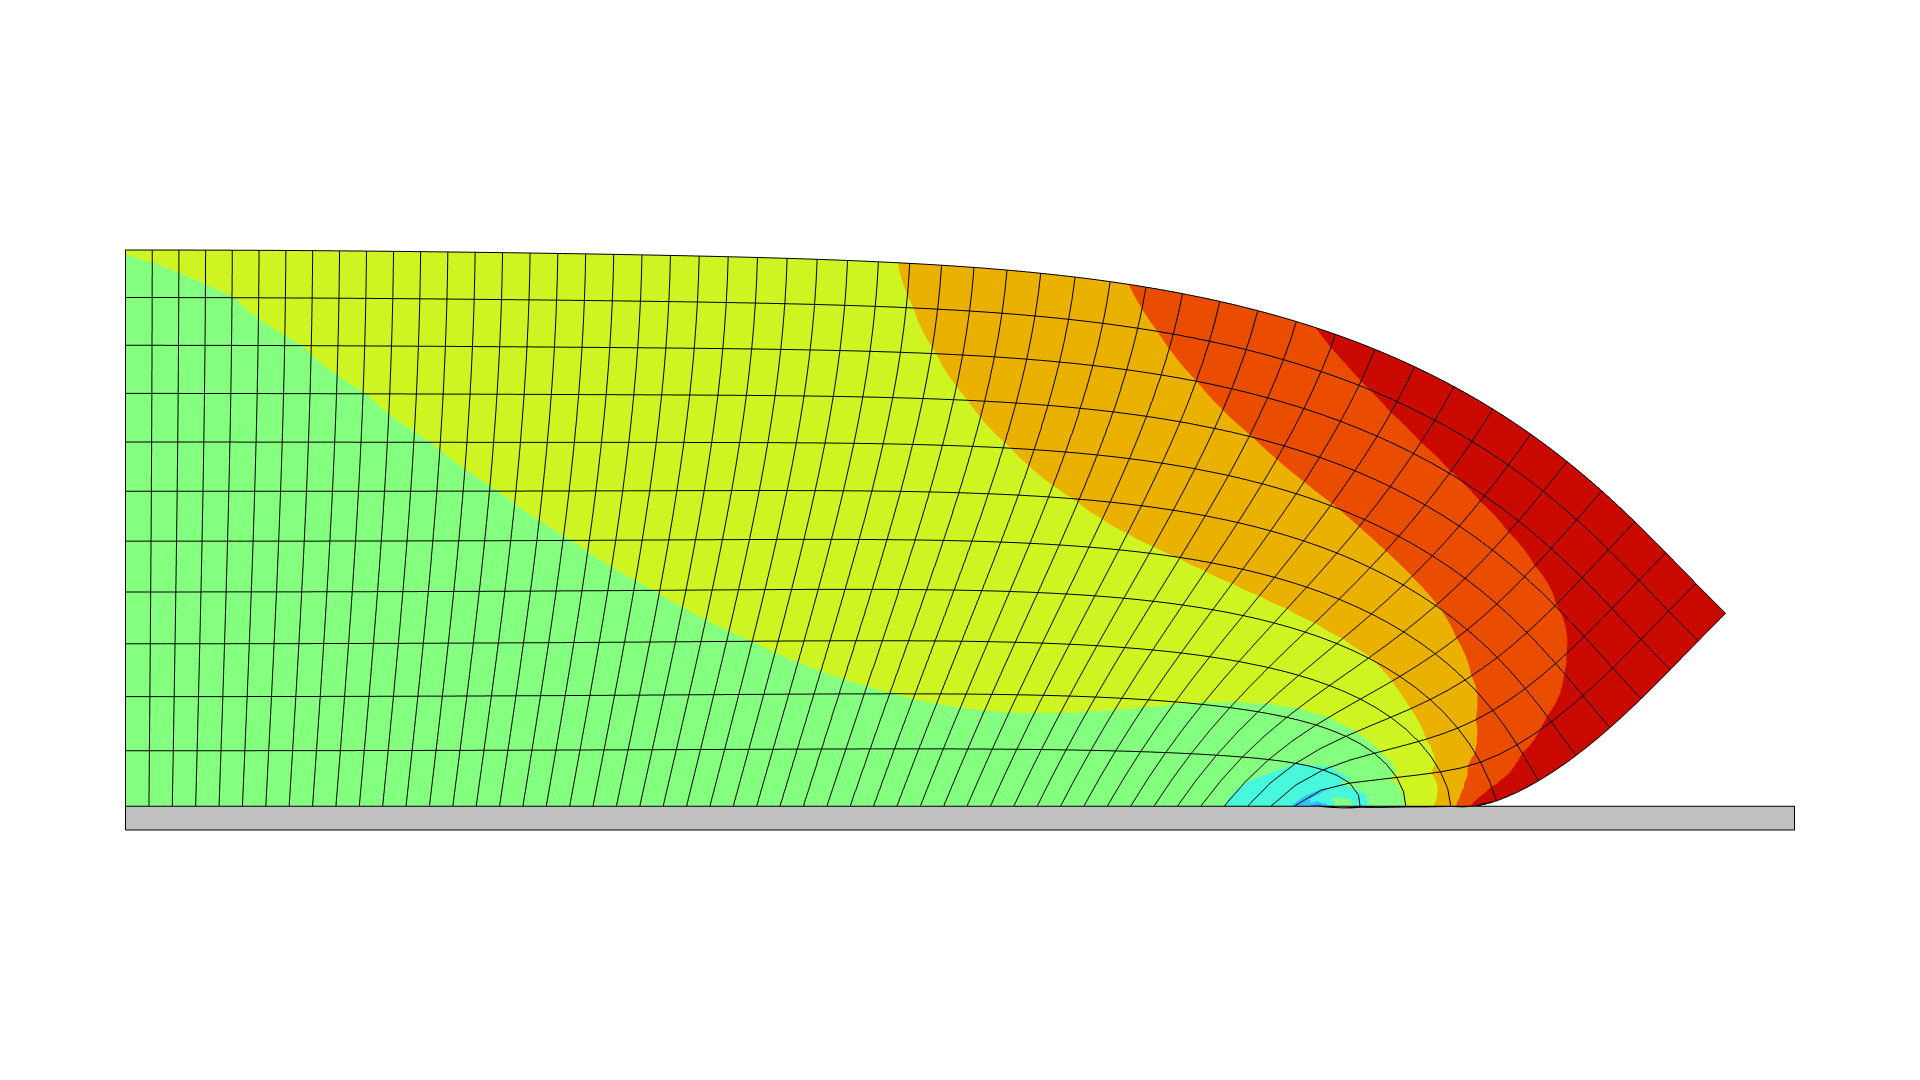 A polymer hydrogel model showing the swelling in the Rainbow color table.